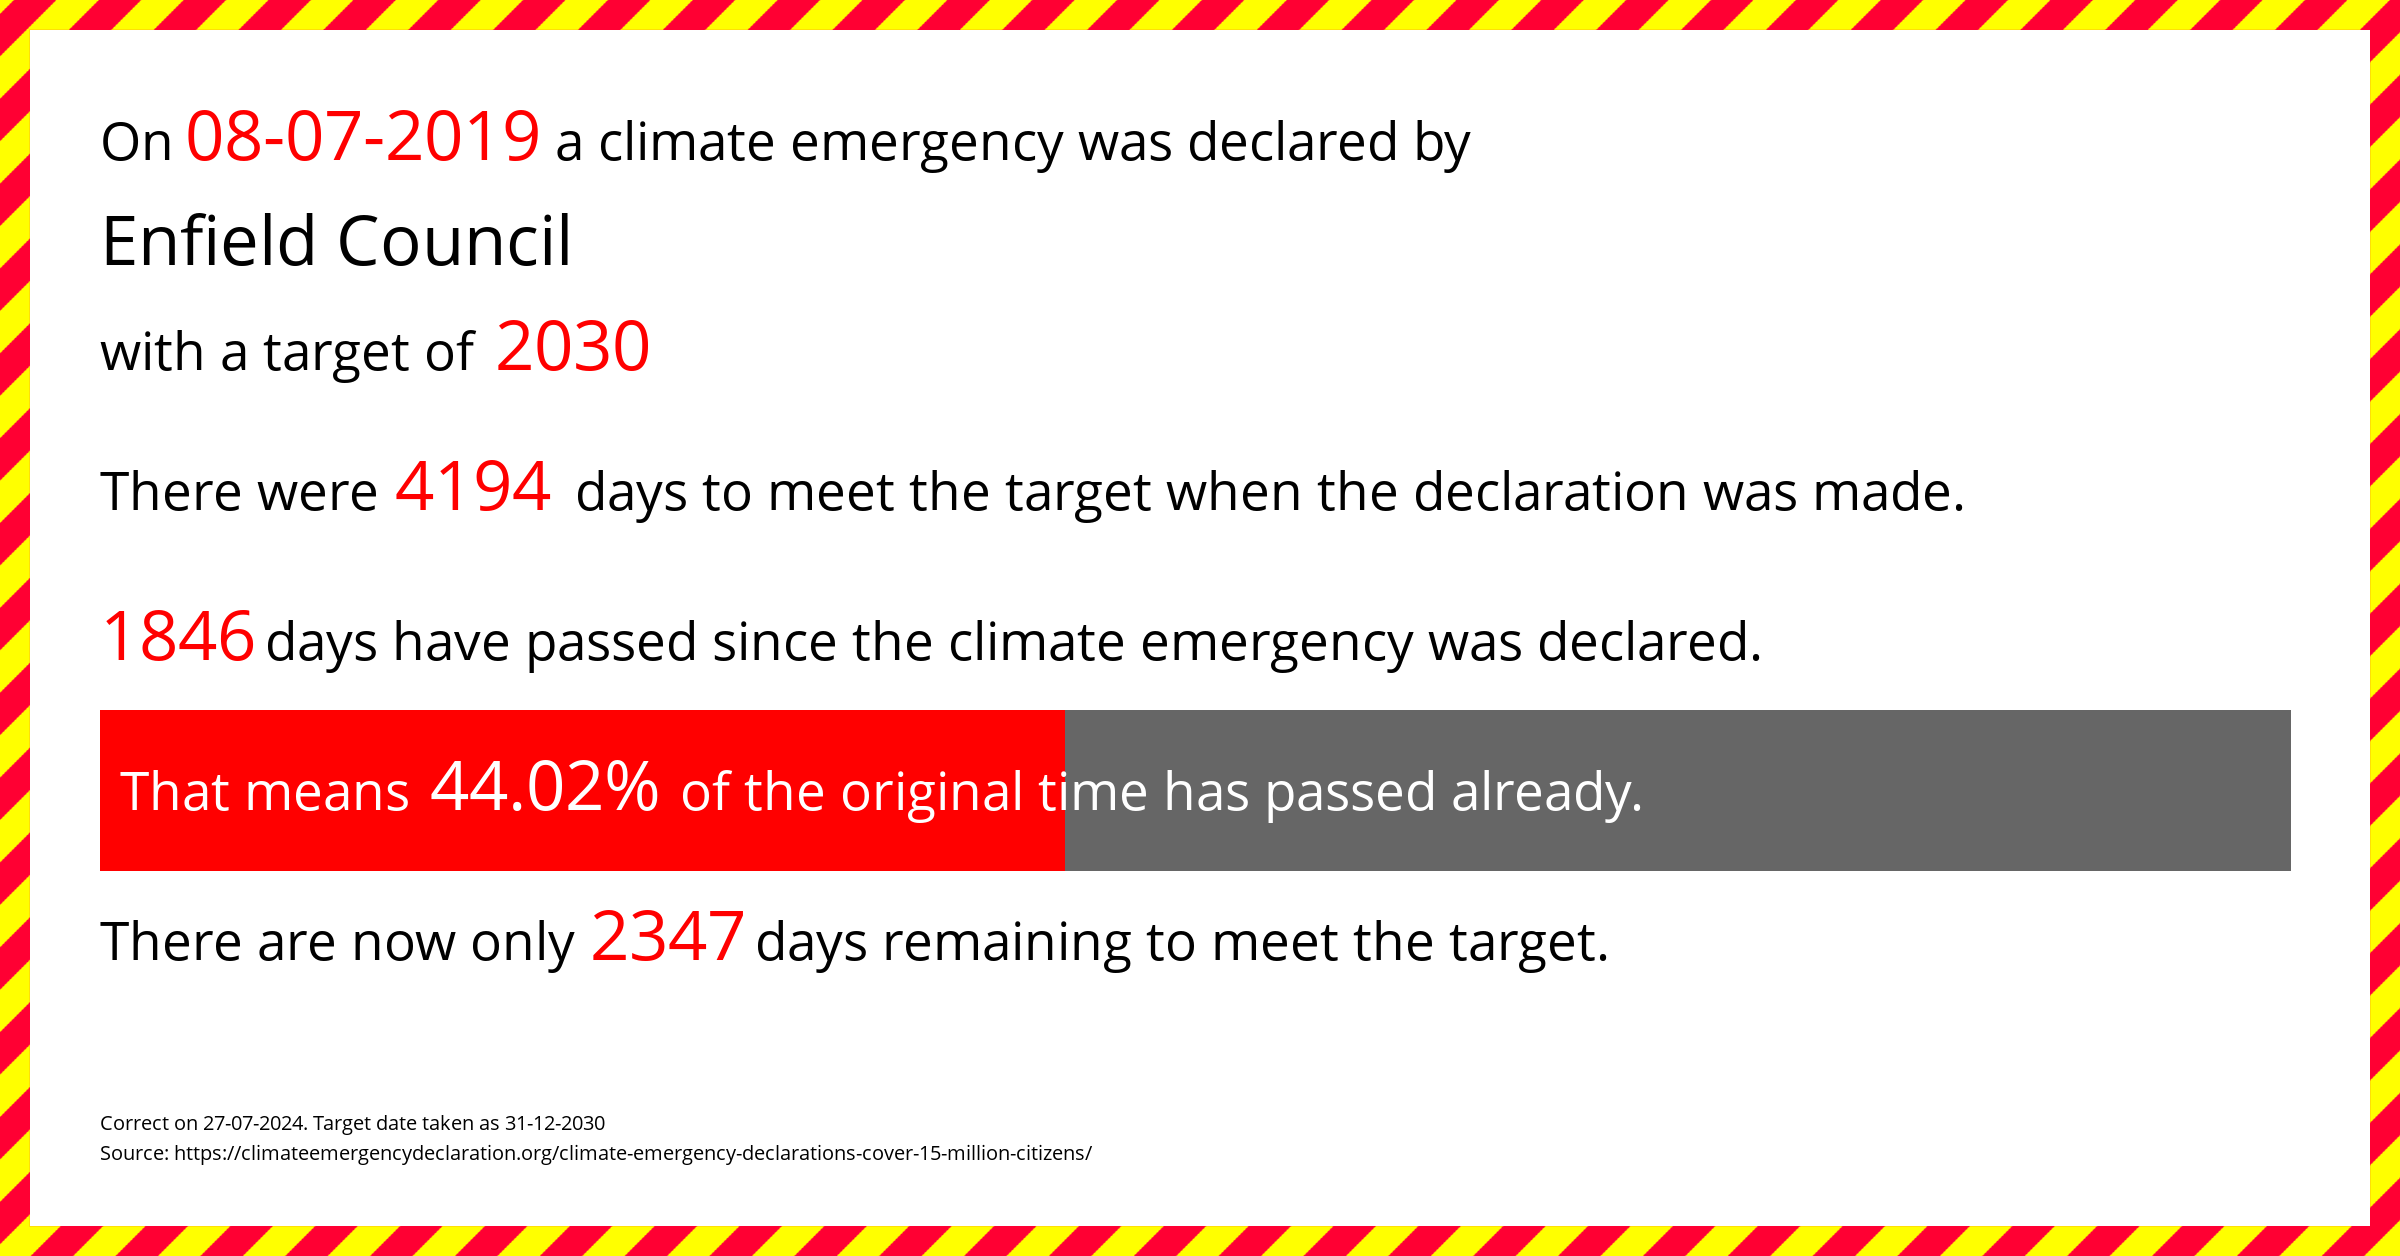 Enfield Council declared a Climate emergency on Monday 8th July 2019, with a target of 2030.